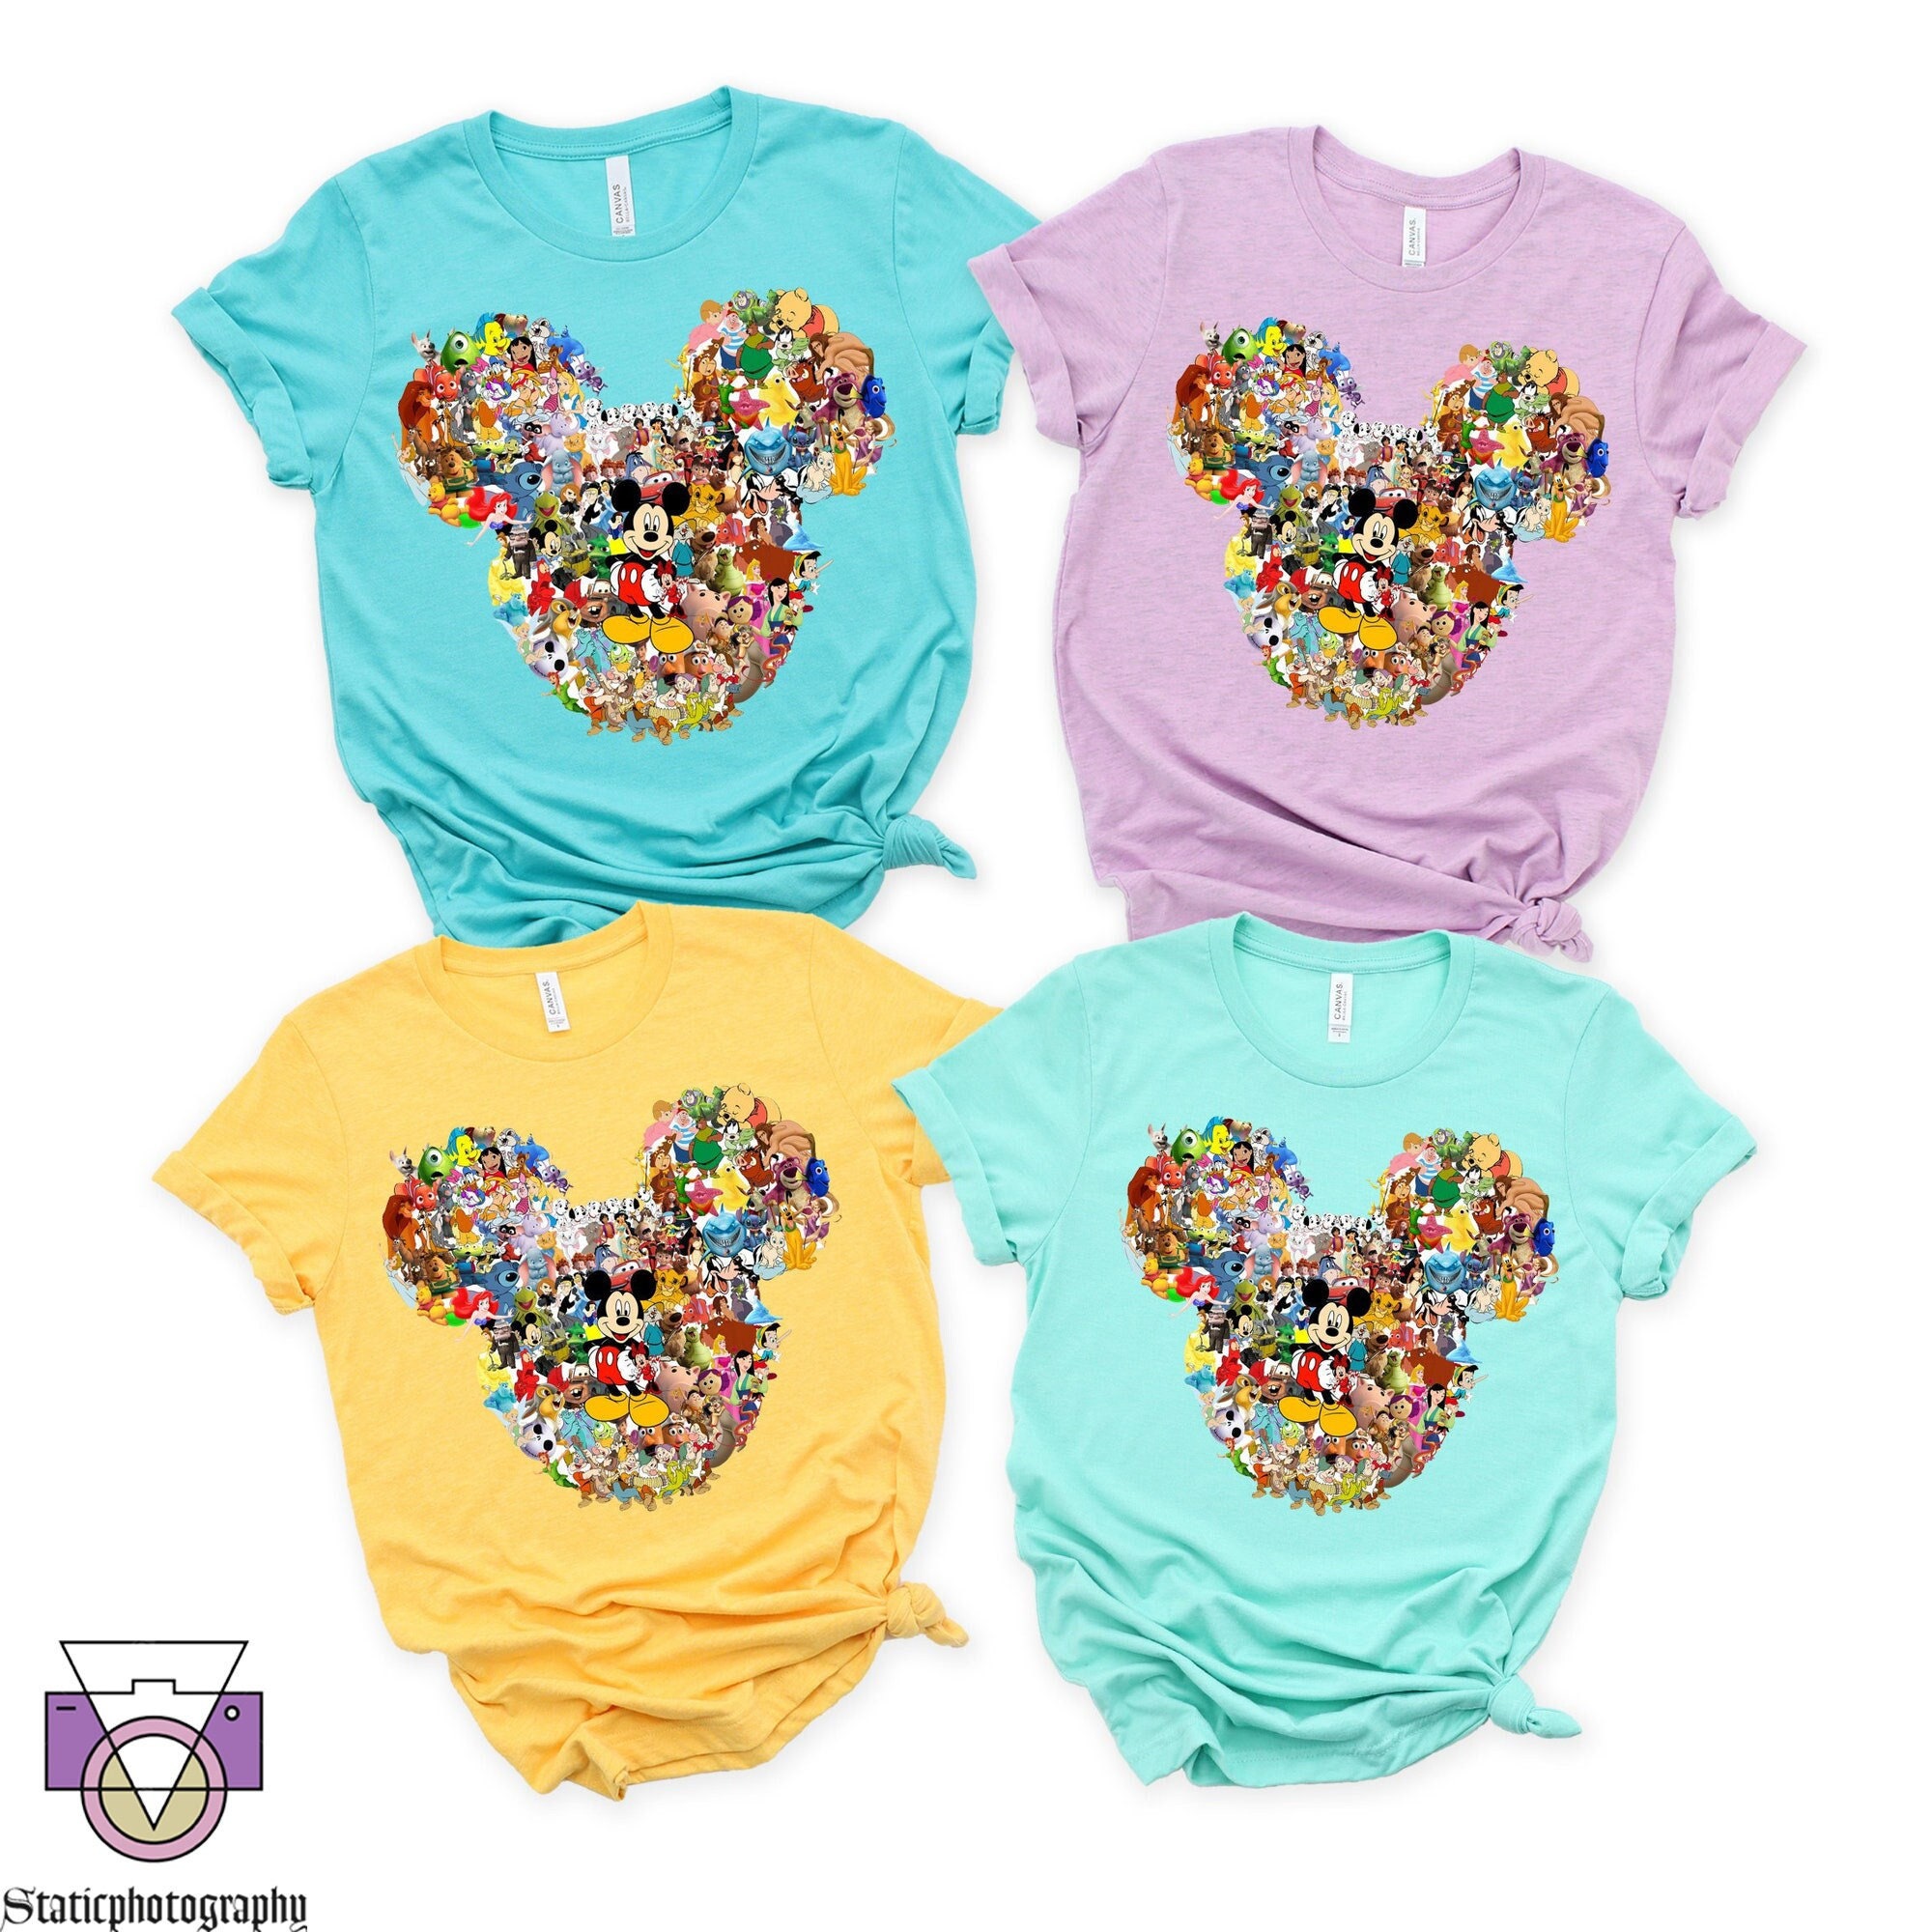 Discover Disney All Characters Shirt, Disney World, Mickey Mouse, Disney Trip